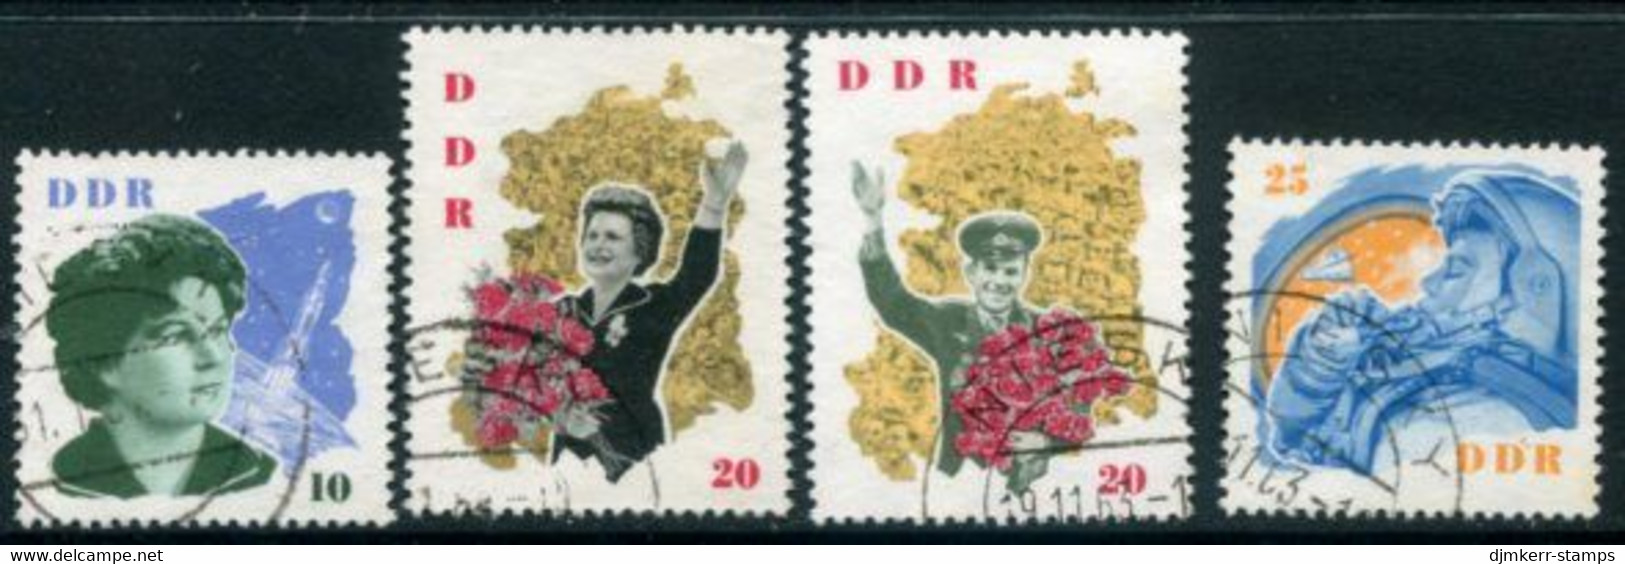 DDR / E. GERMANY 1963 Visit Of Soviet Astronauts Used.  Michel  993-96 - Used Stamps